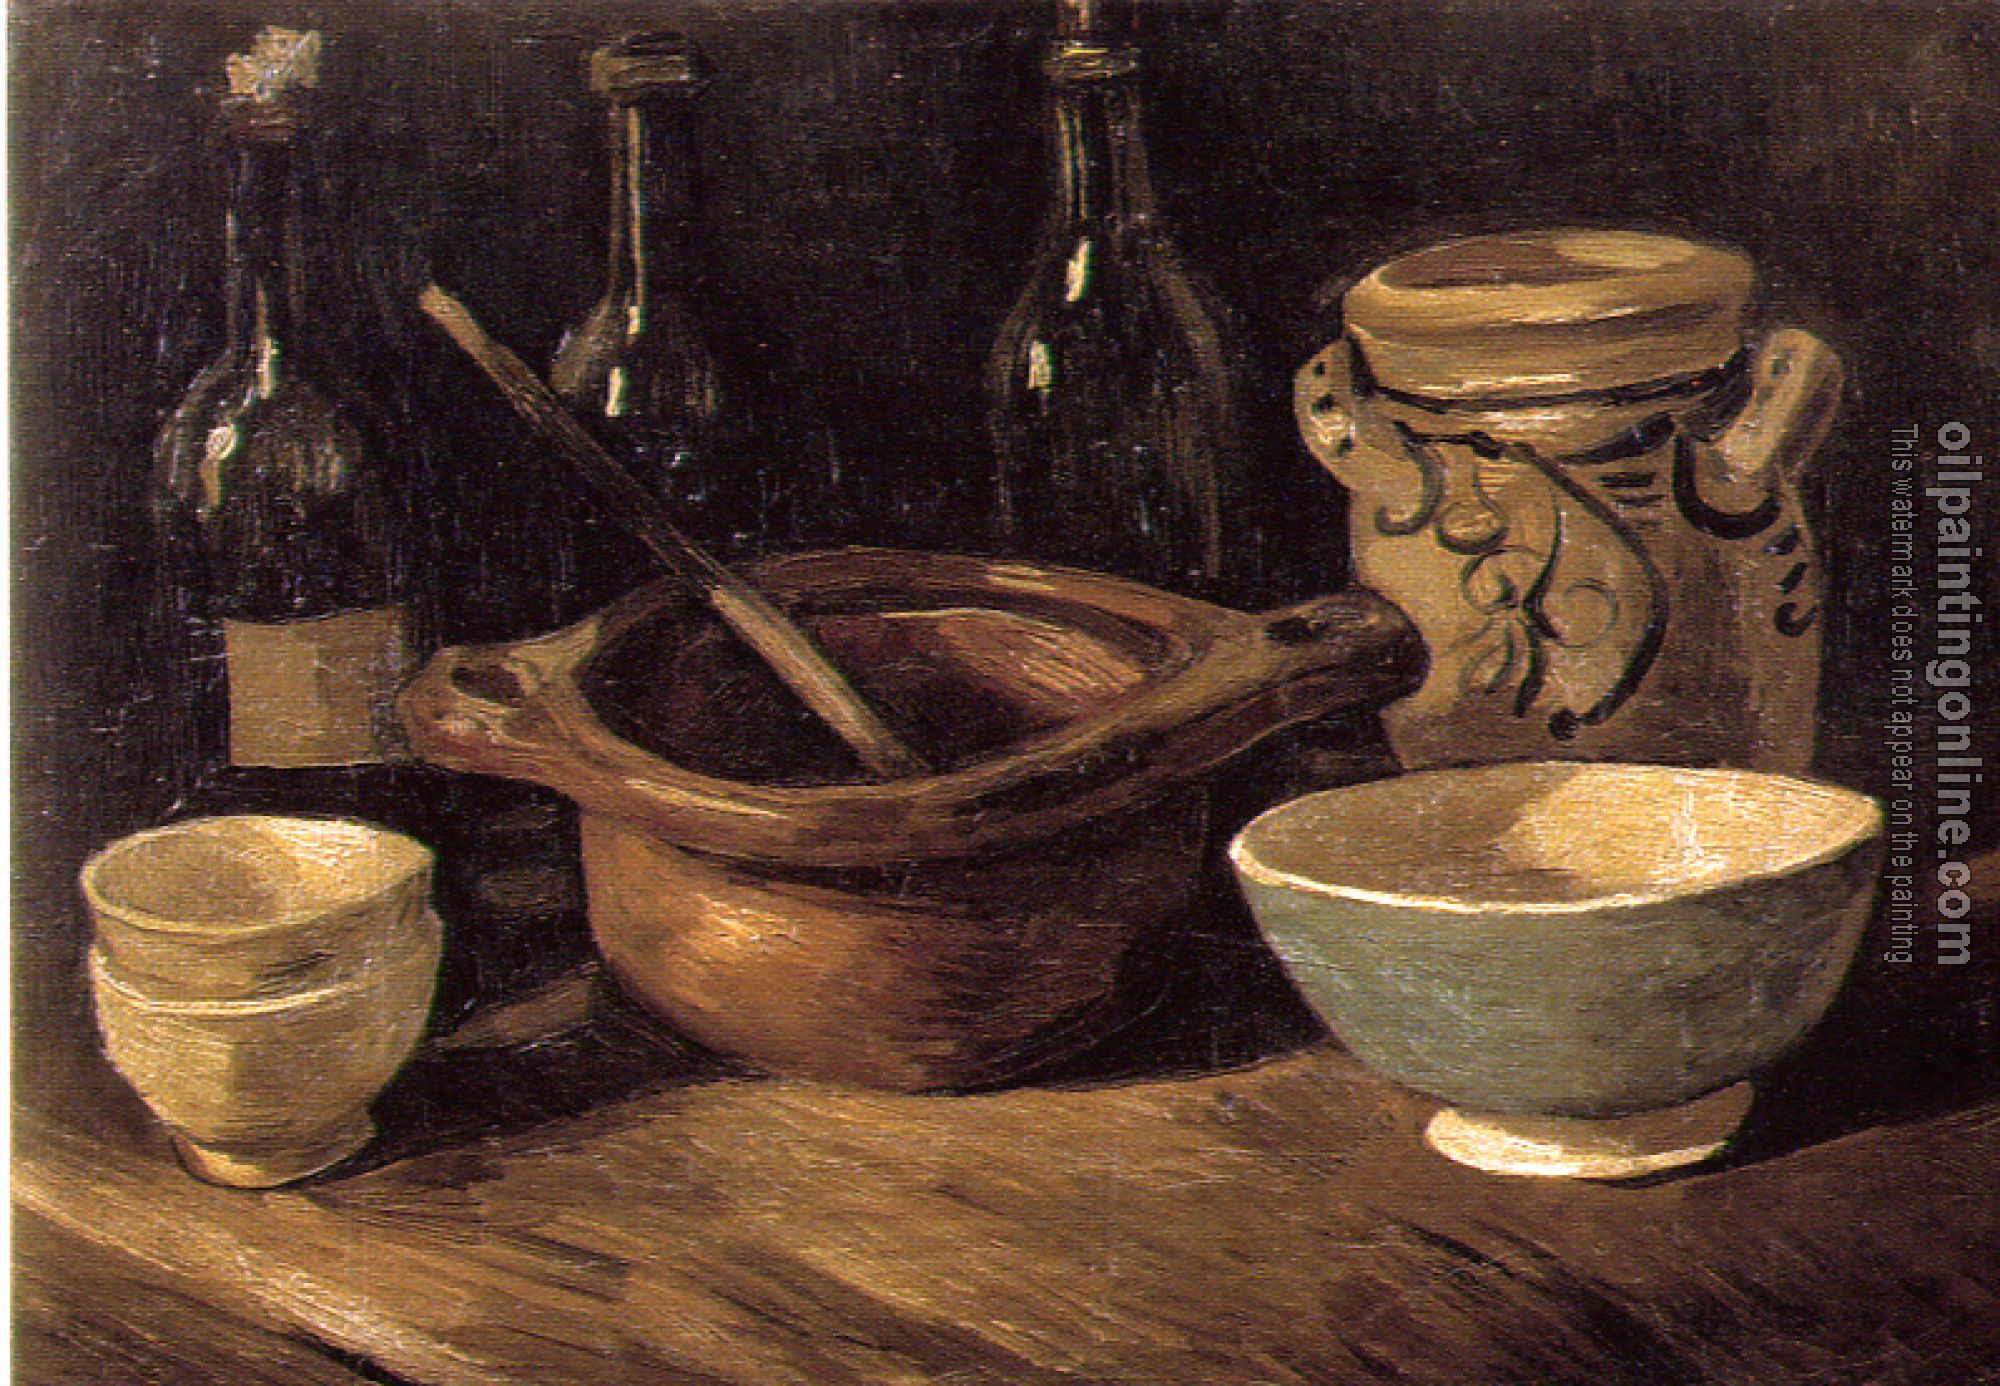 Gogh, Vincent van - Still Life with Pottery and Three Bottles